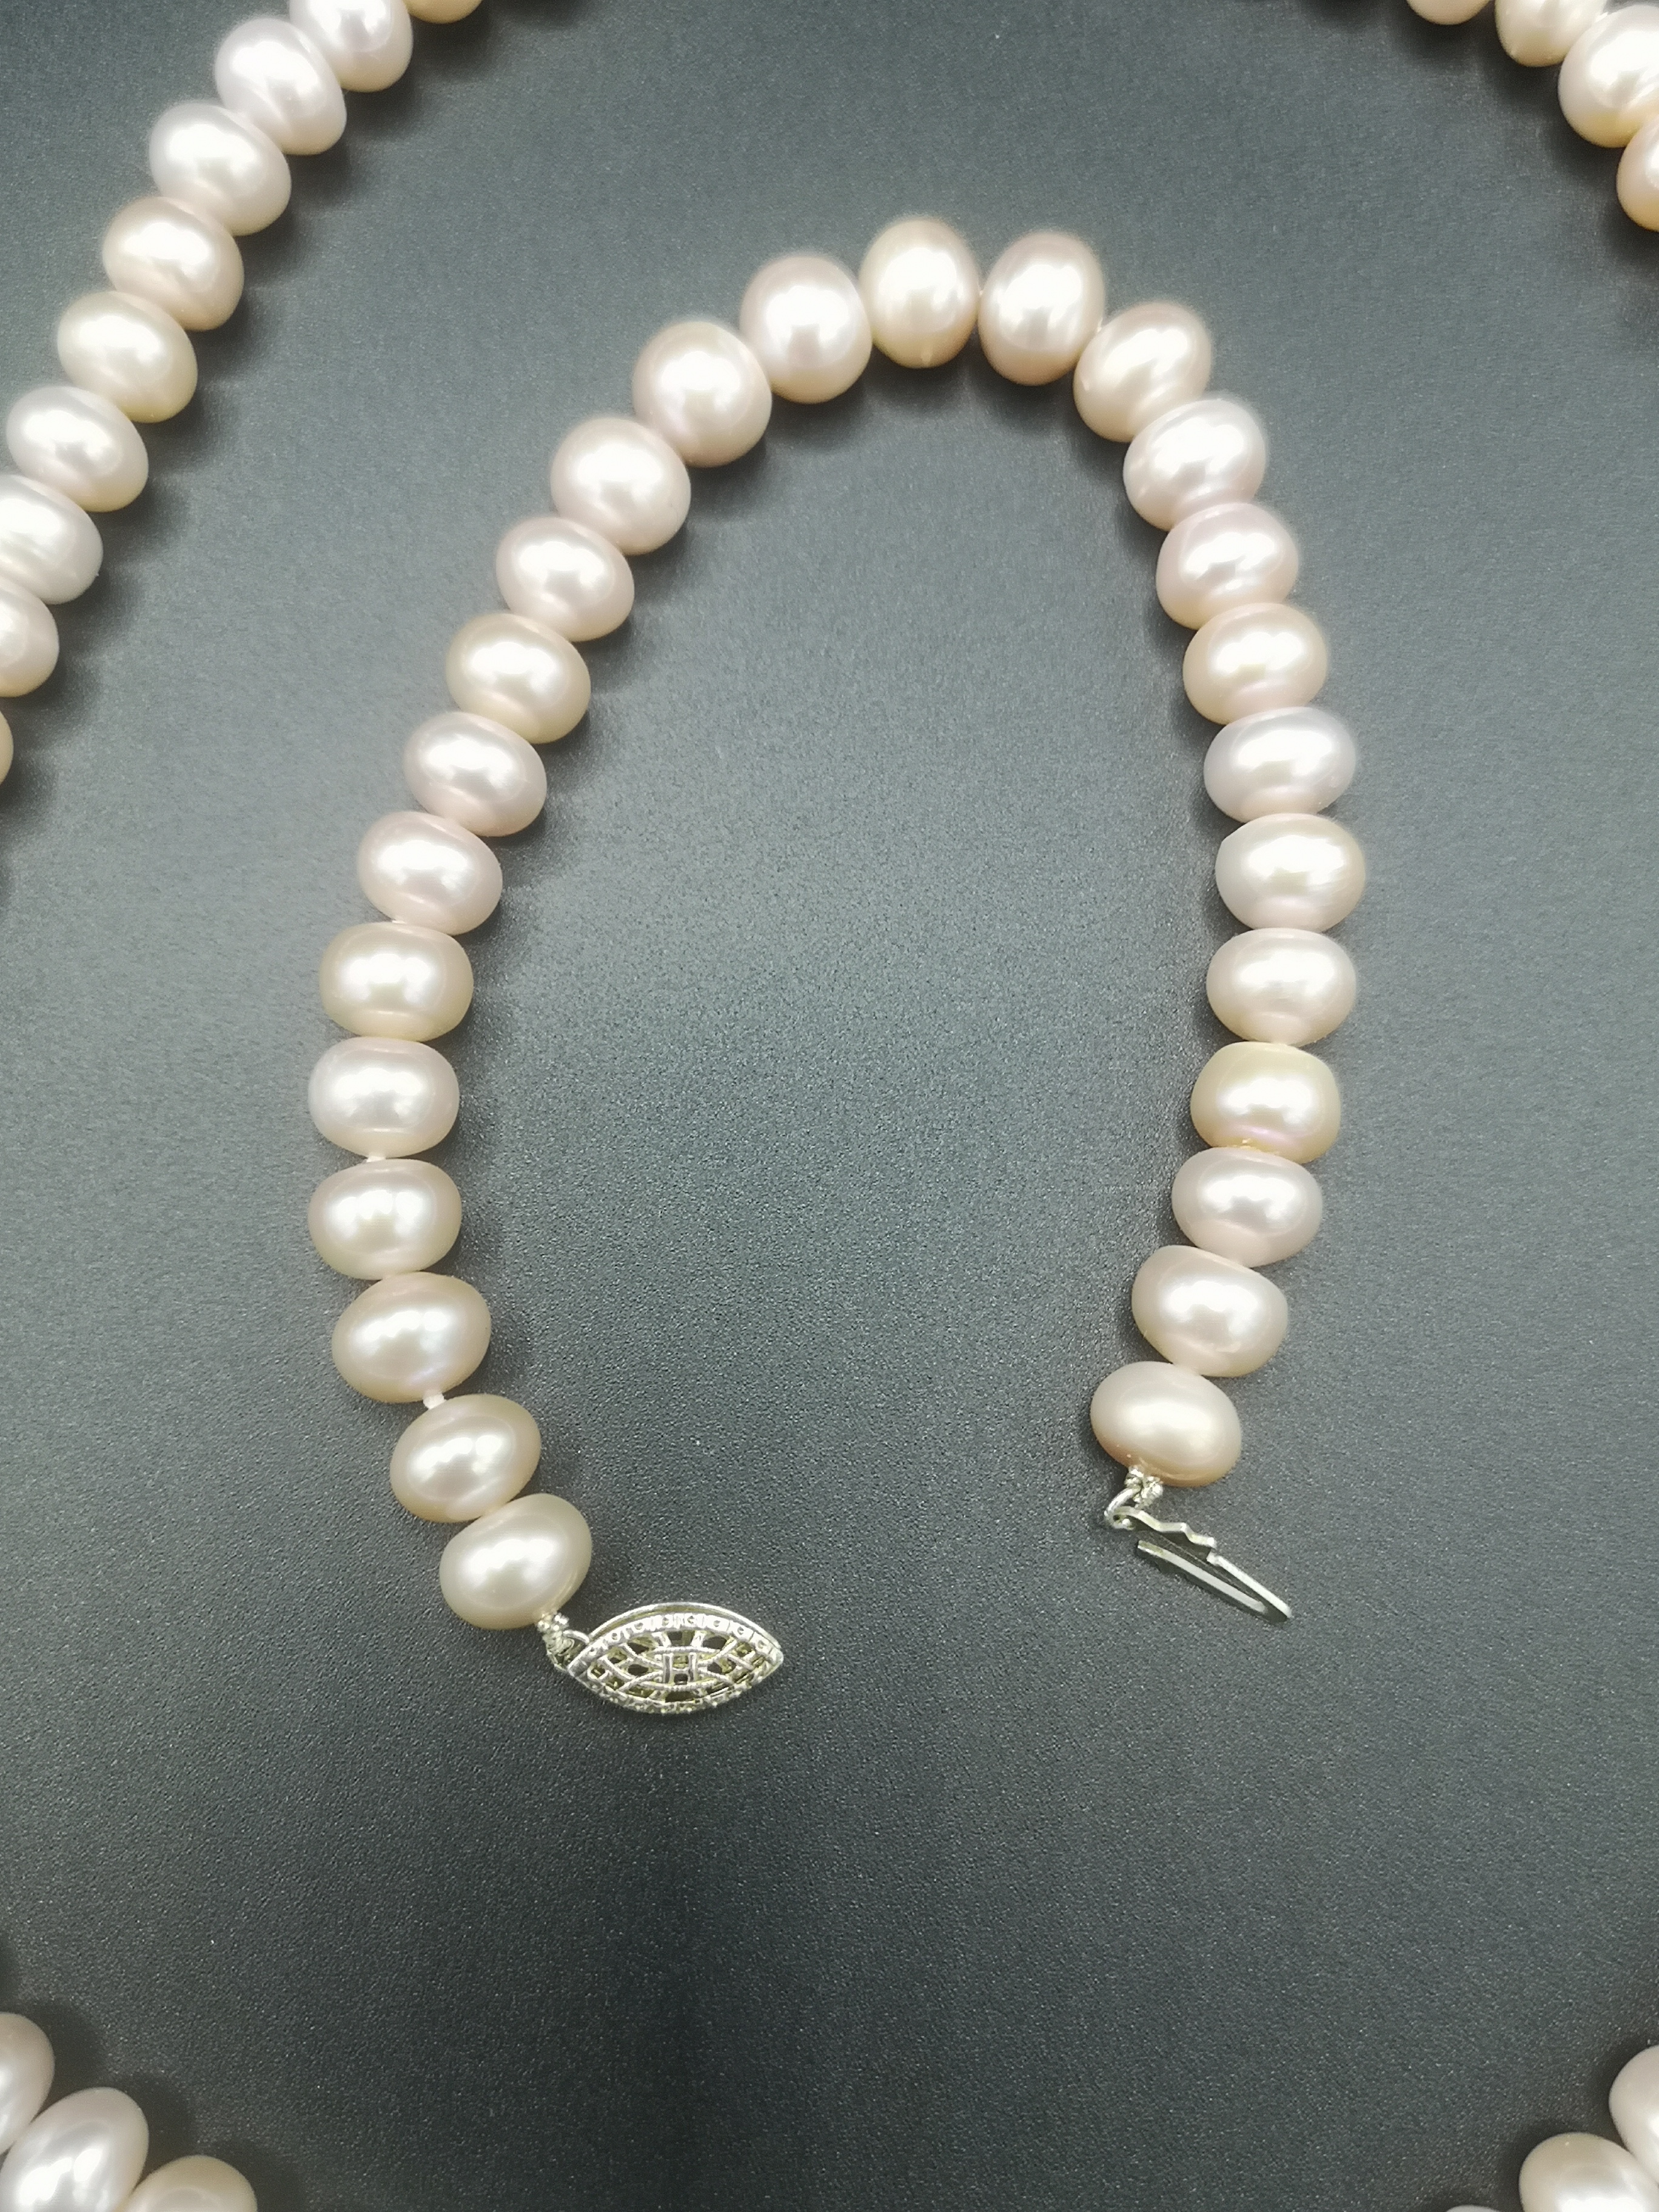 Pearl necklace with matching bracelet - Image 2 of 5